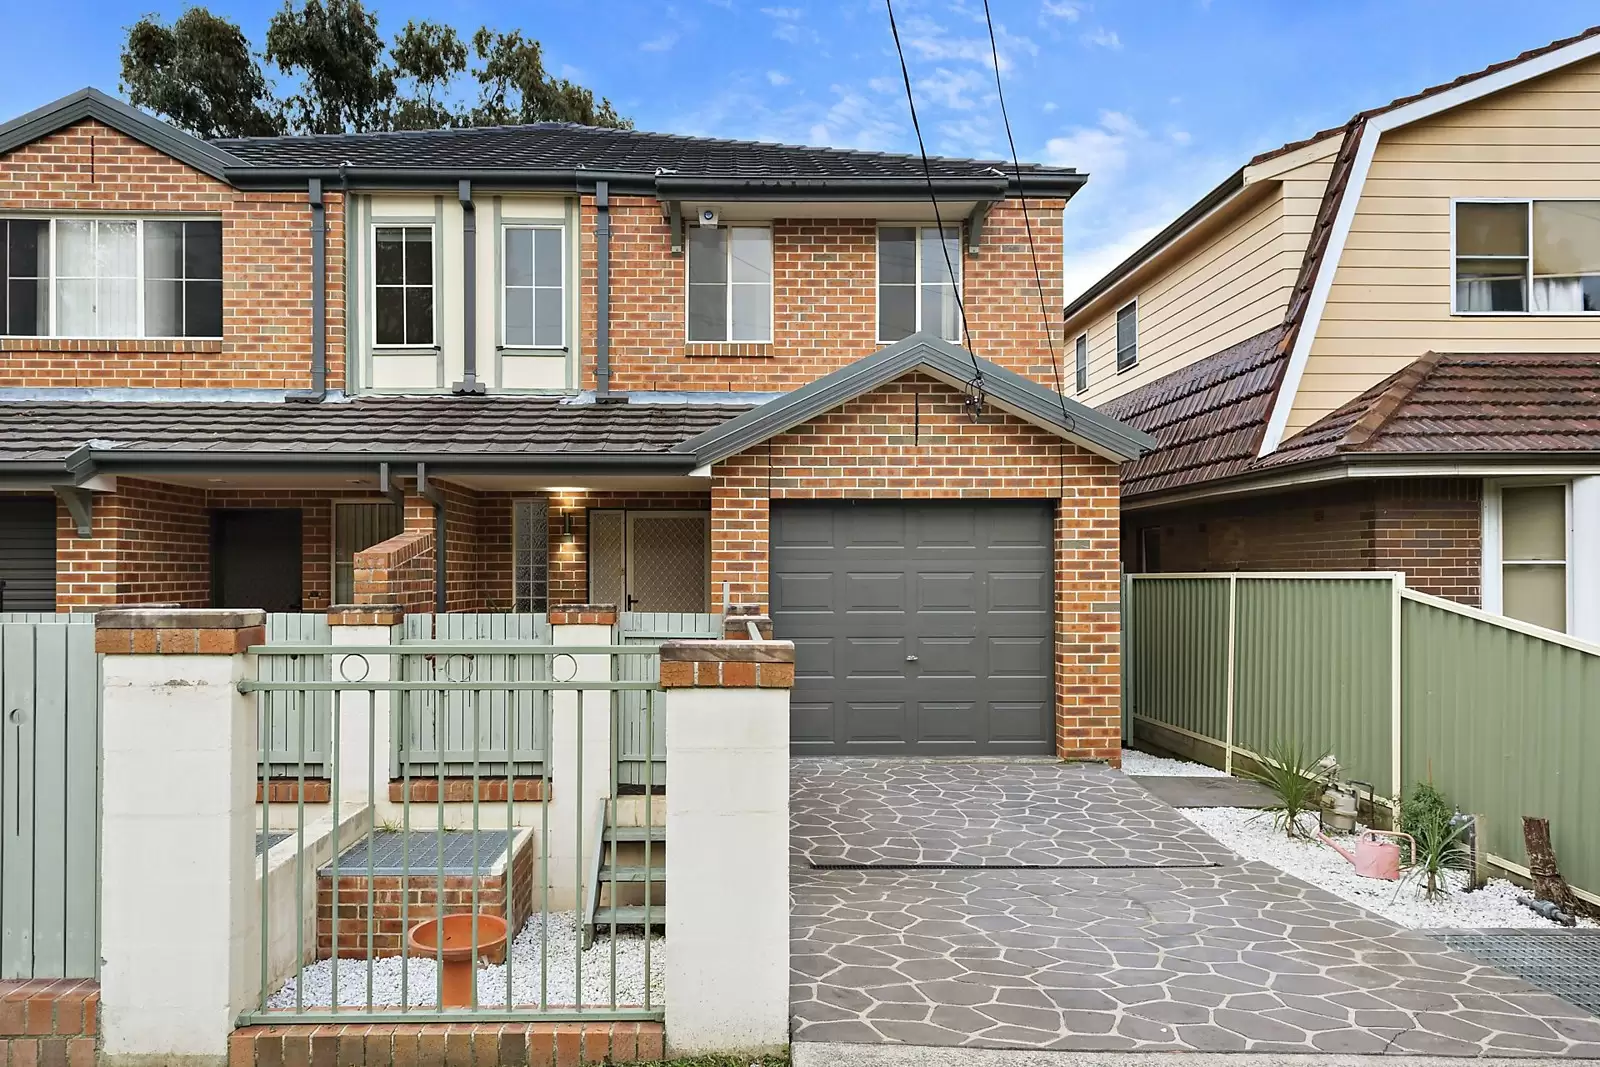 Photo #6: 89B Cardigan Street, Guildford - Sold by Sydney Sotheby's International Realty